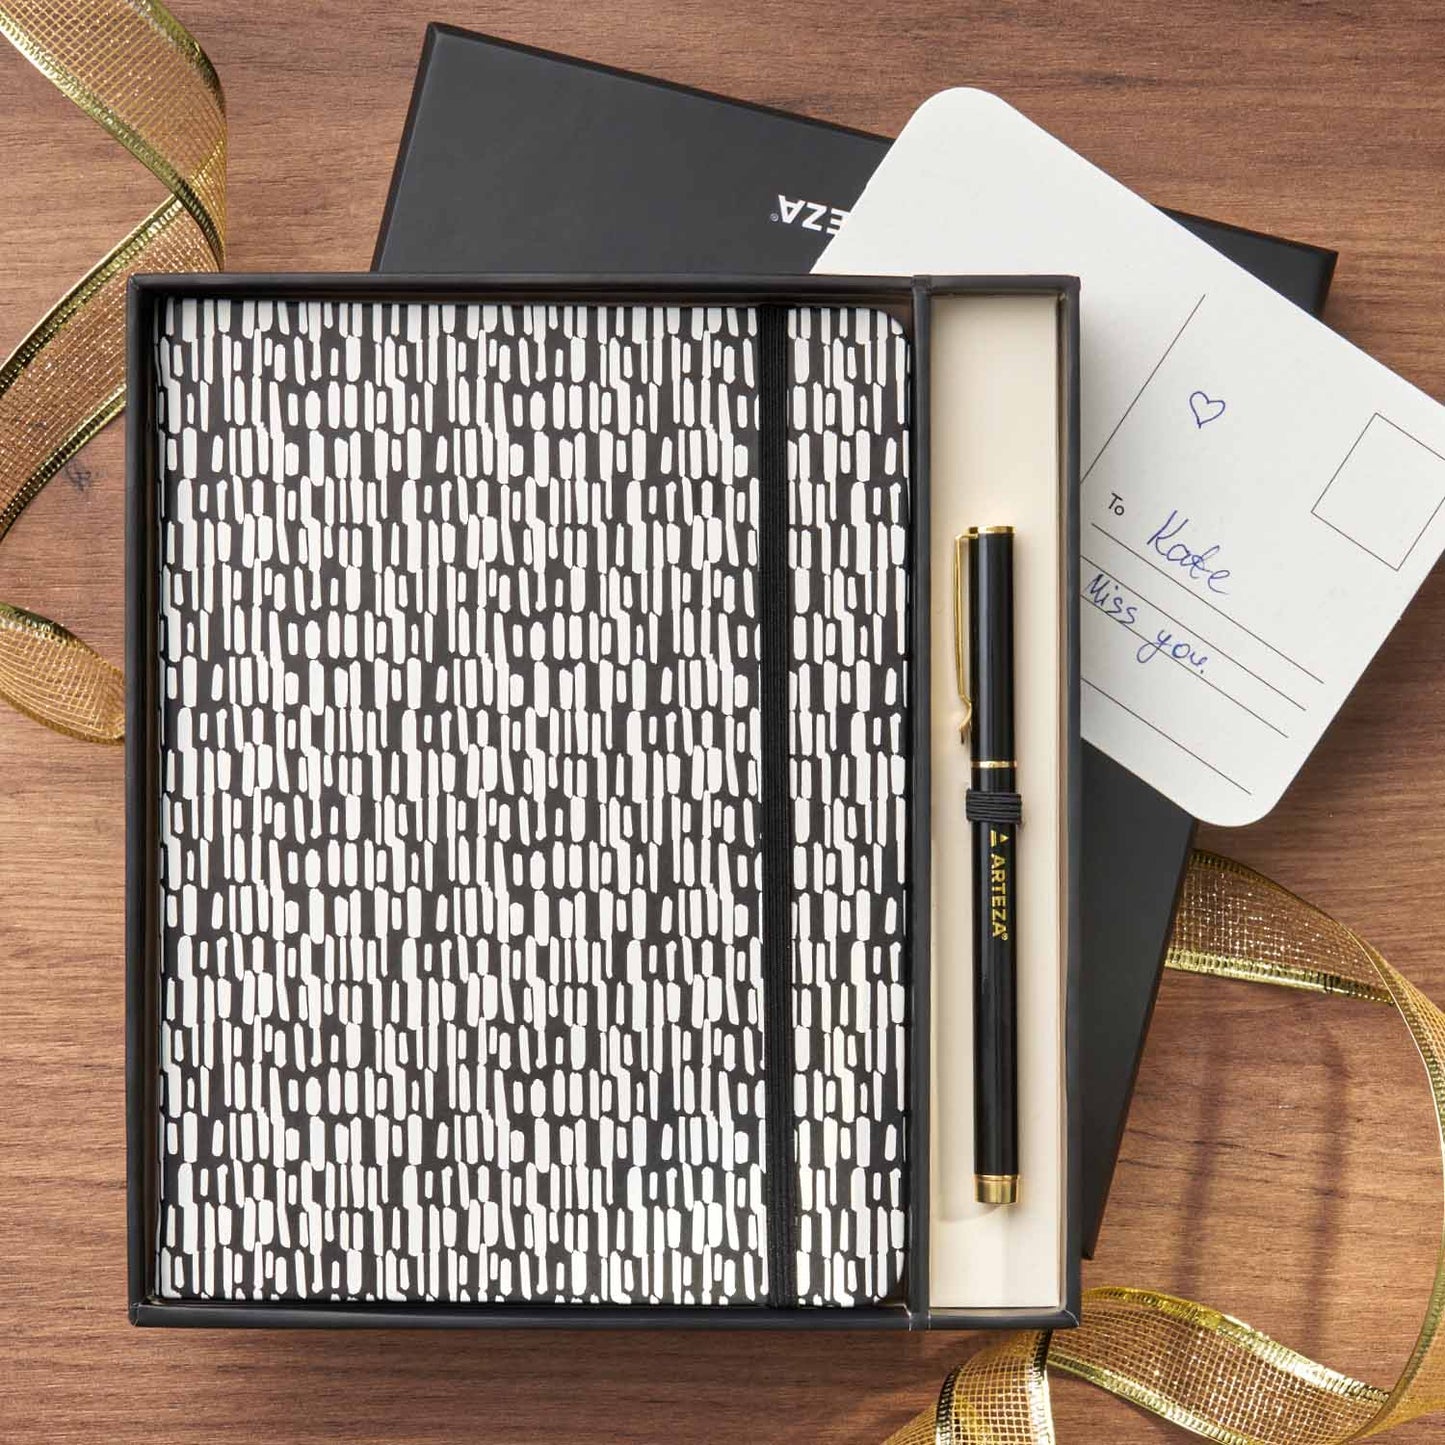 Arteza Journal Gift Set, Black and White, 6x8 Journal with Pen